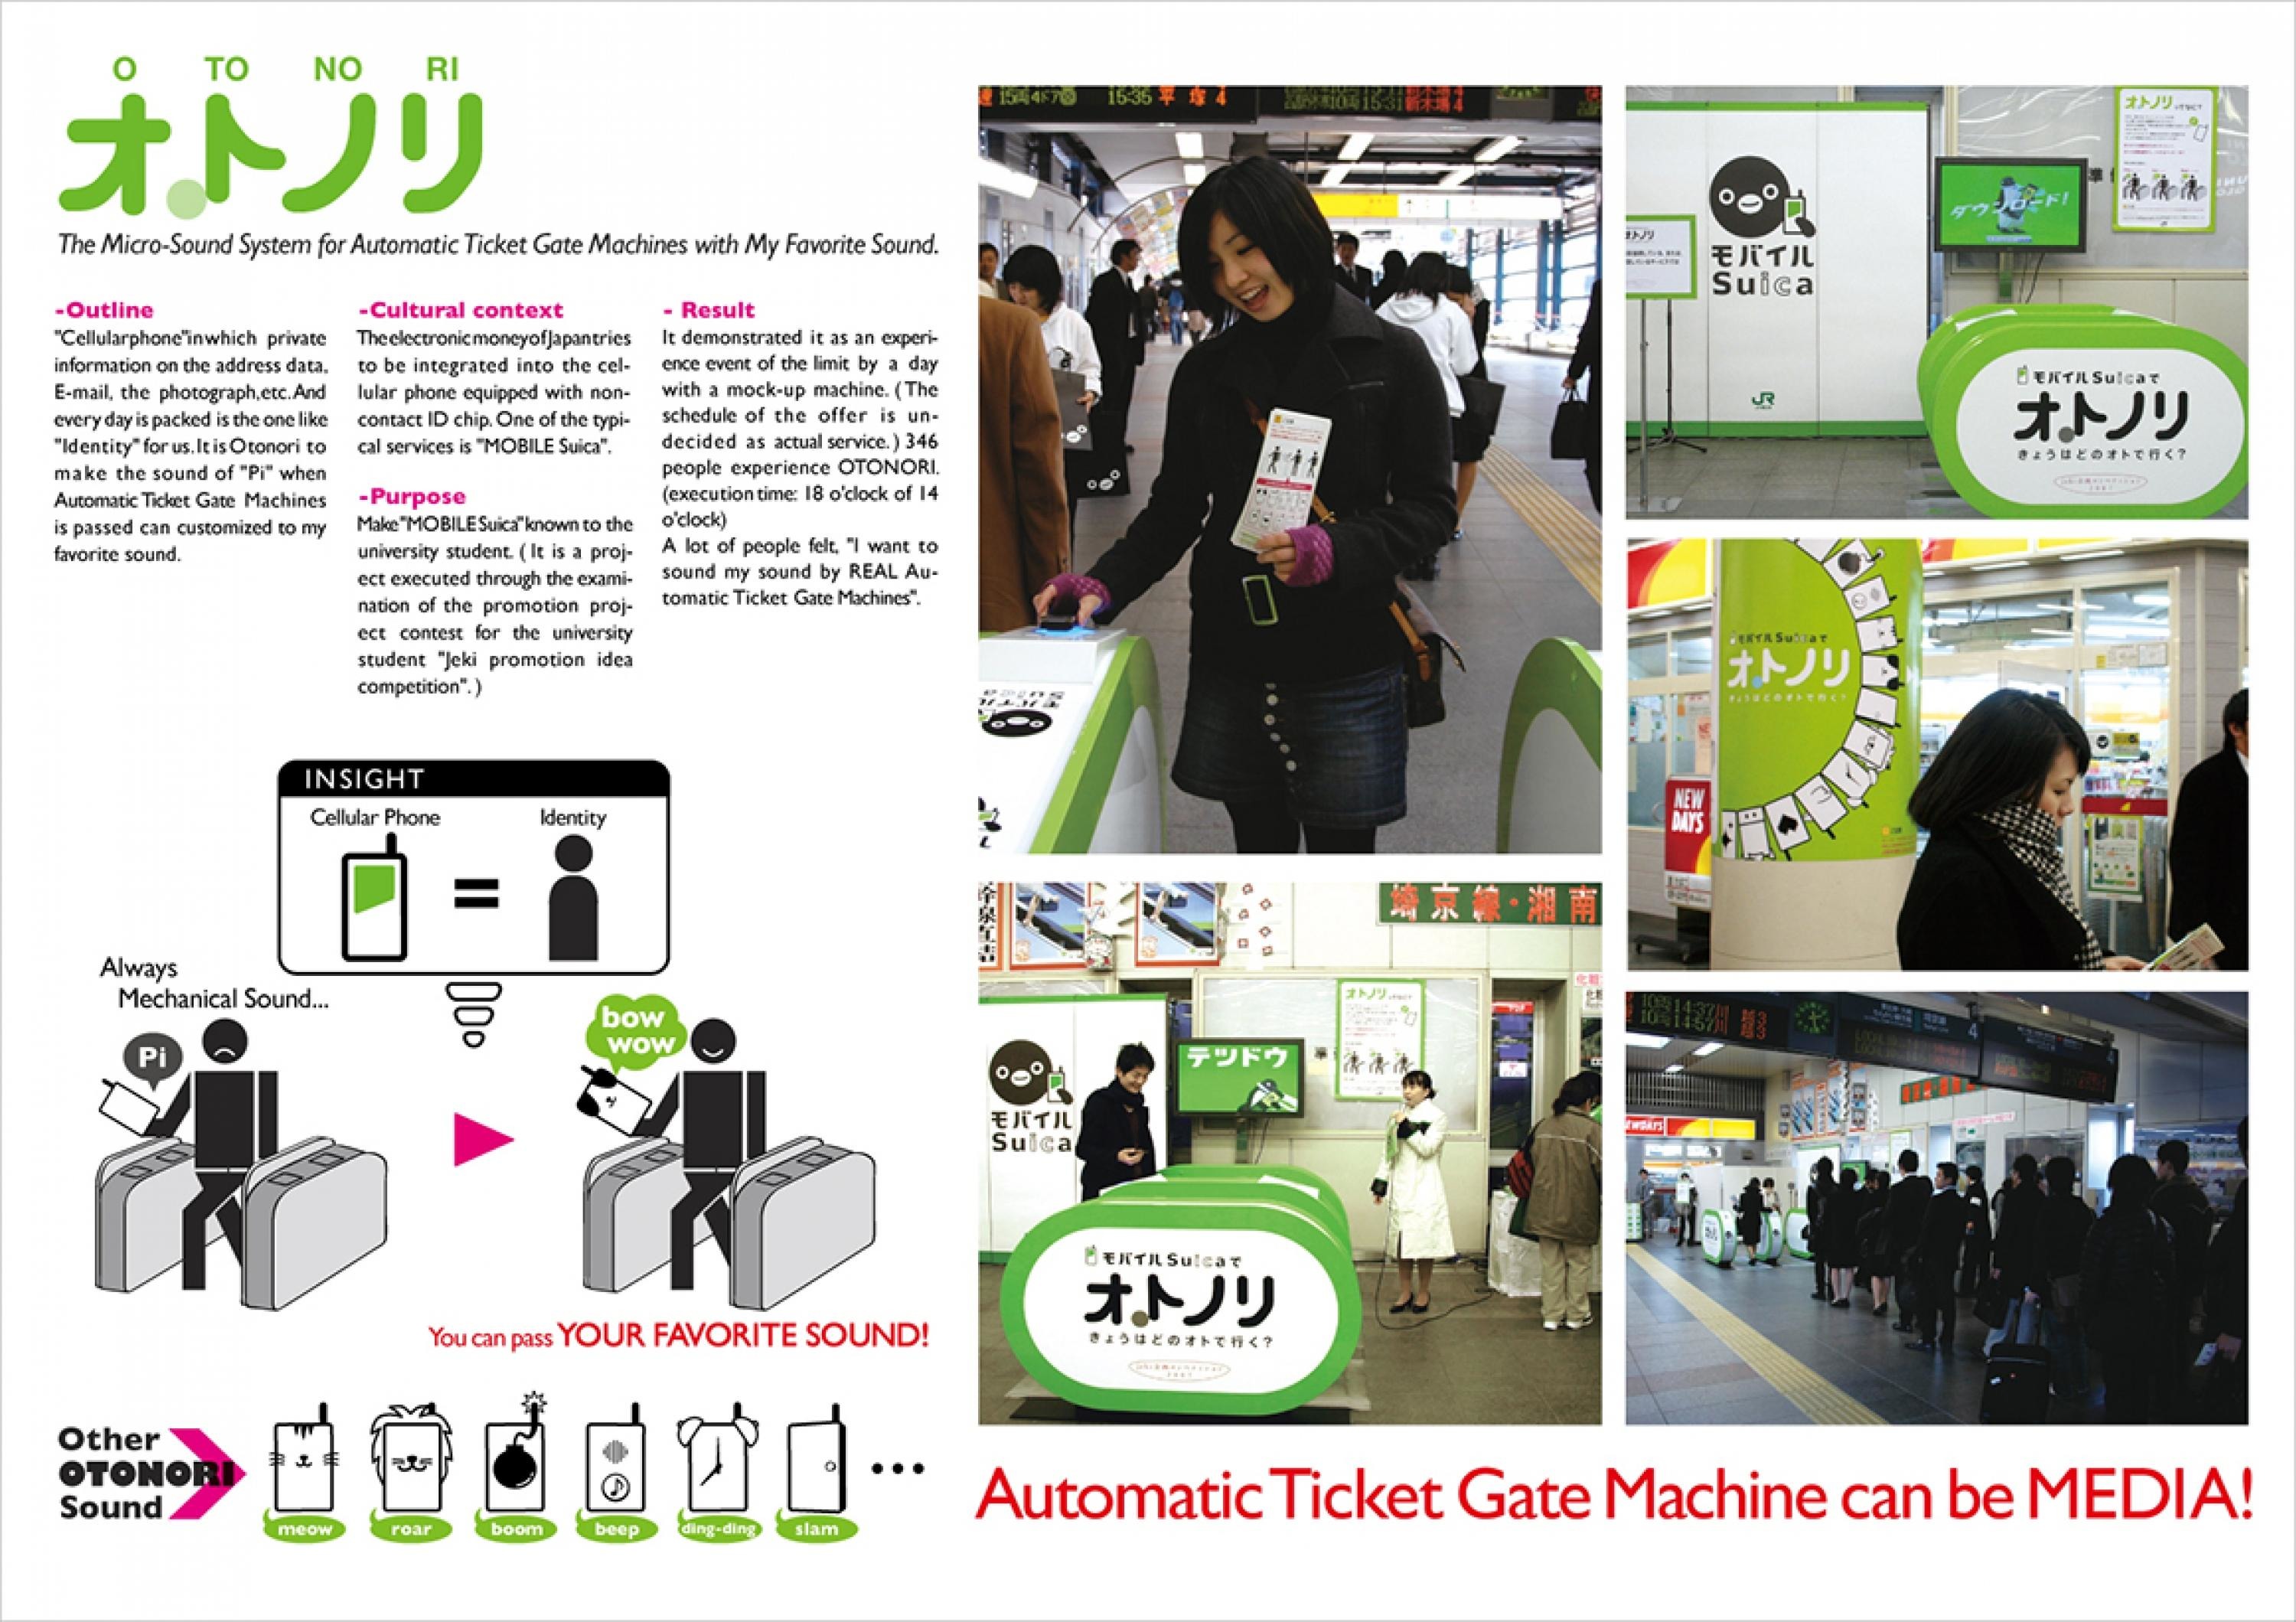 MOBILE SUICA ELECTRONIC MONEY IN PHONE